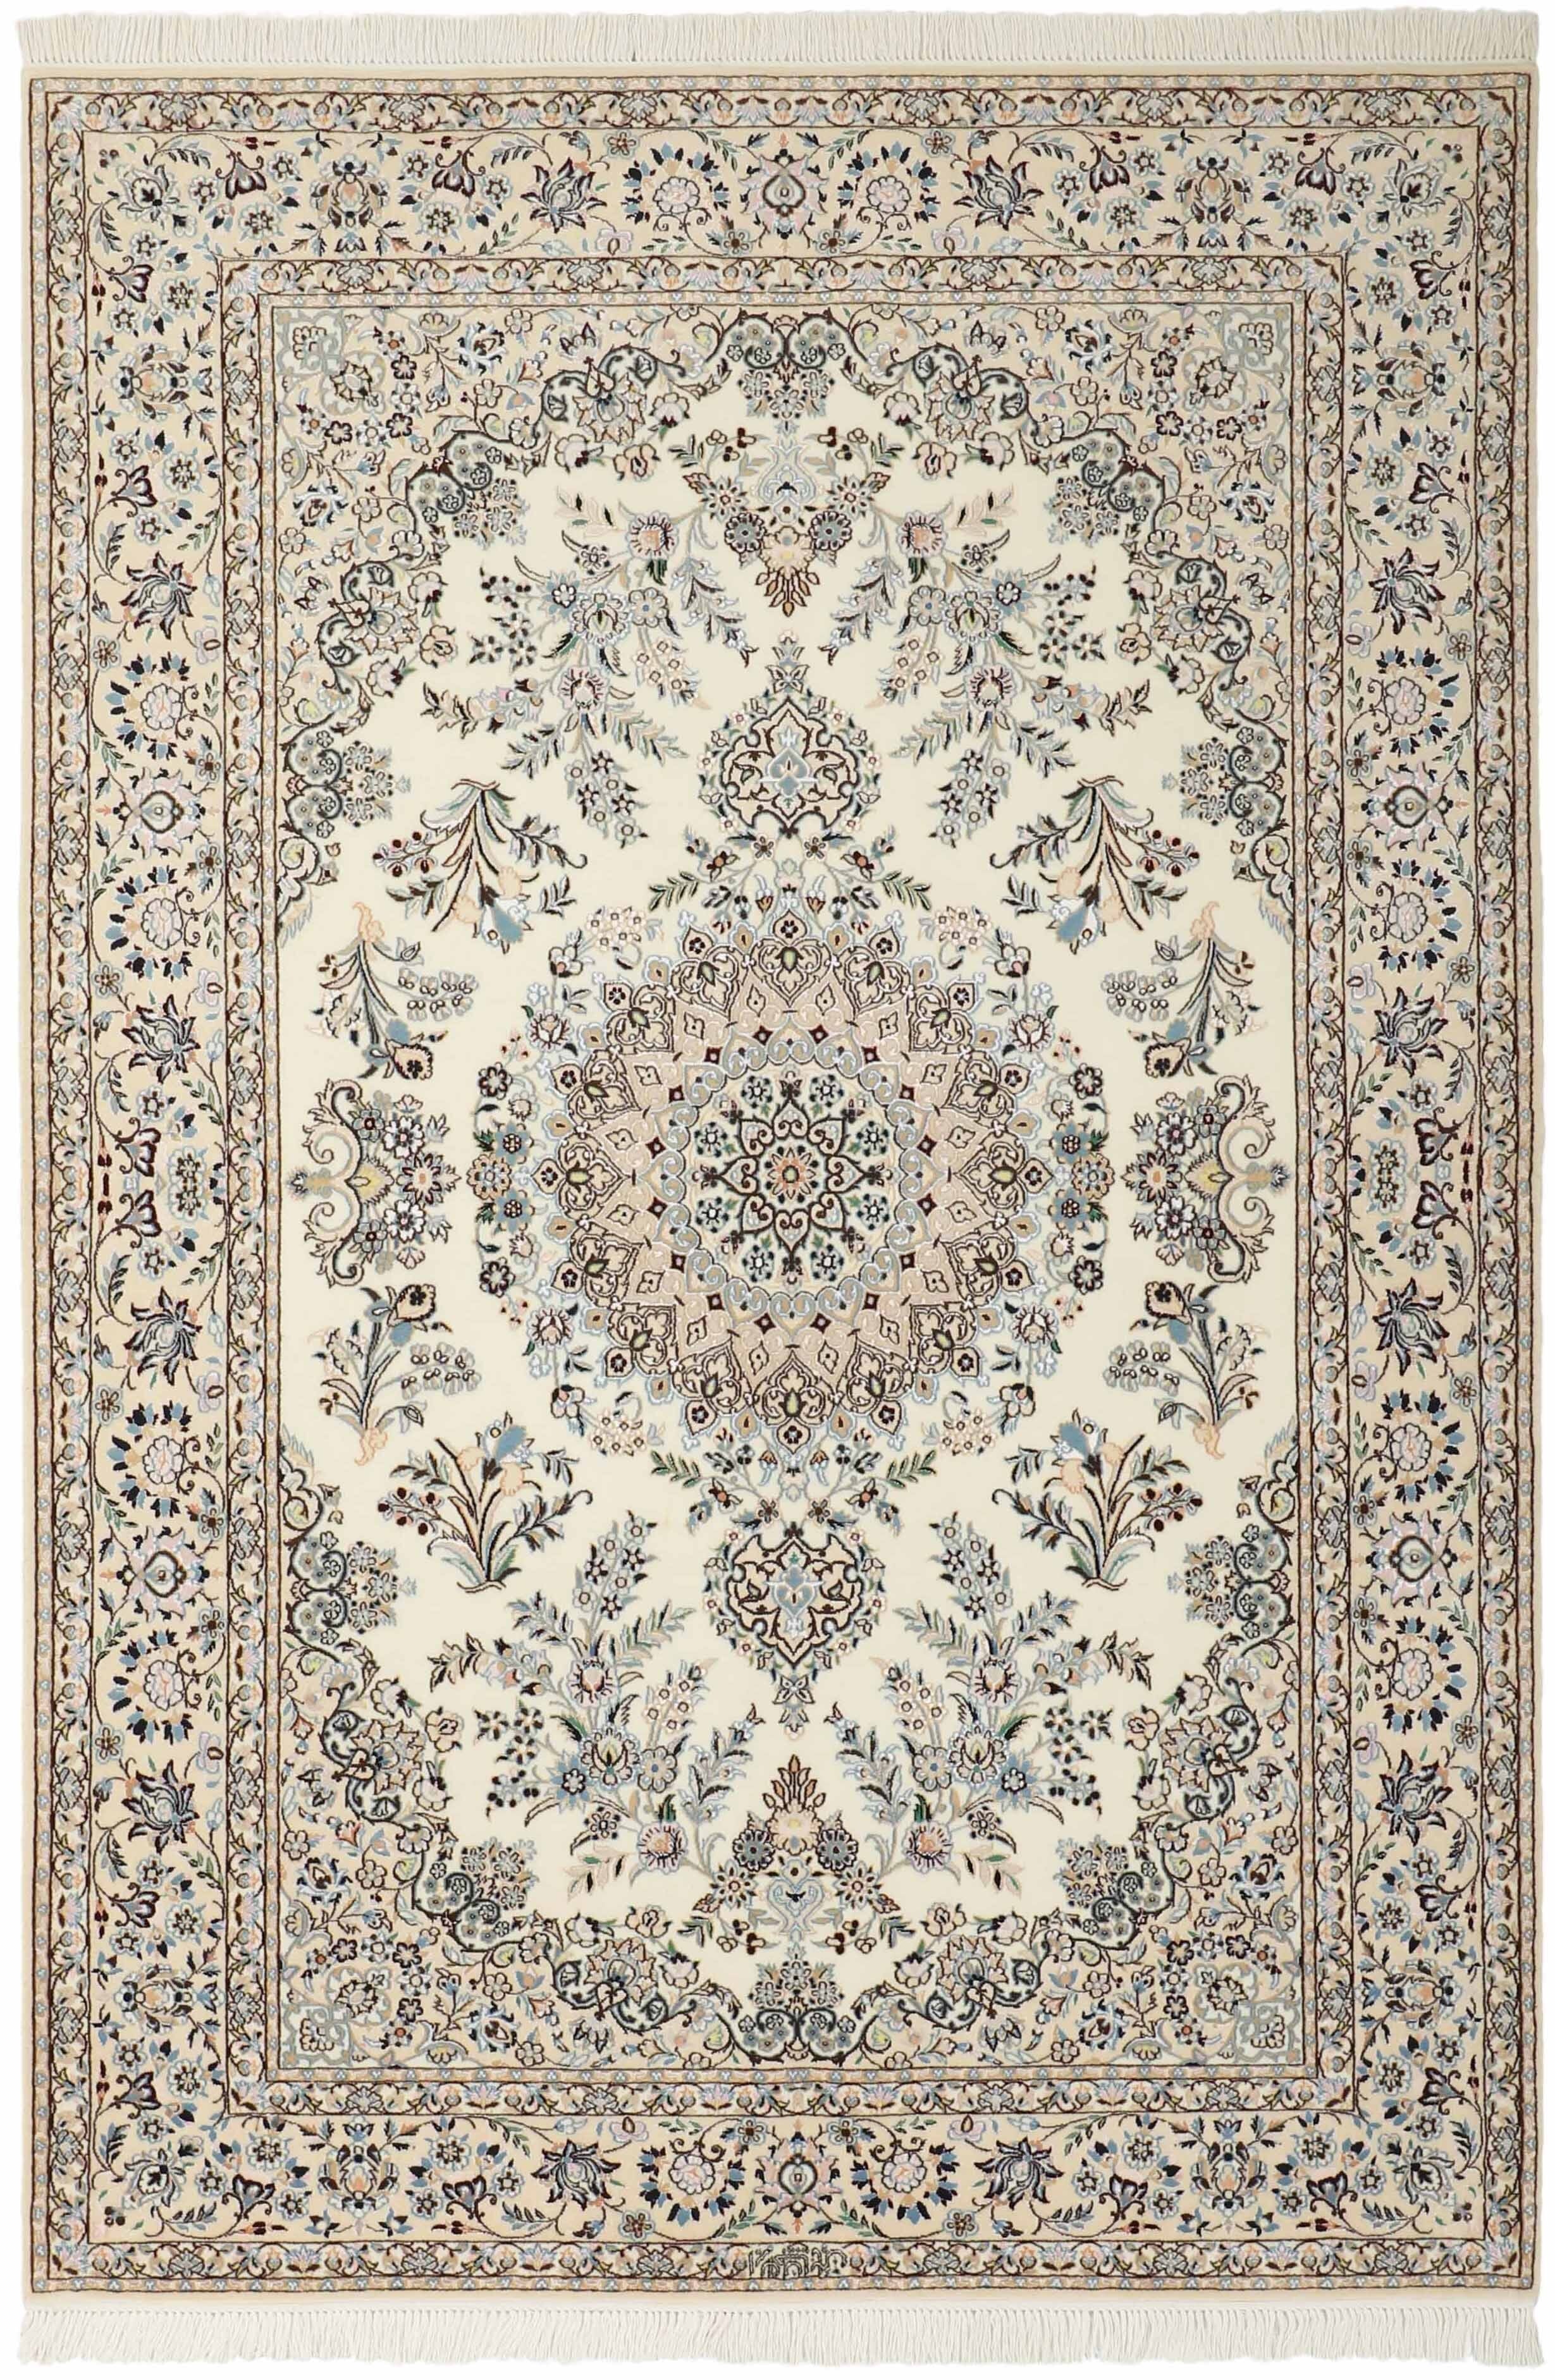 Authentic oriental rug with traditional floral design in red, cream, beige, blue and green